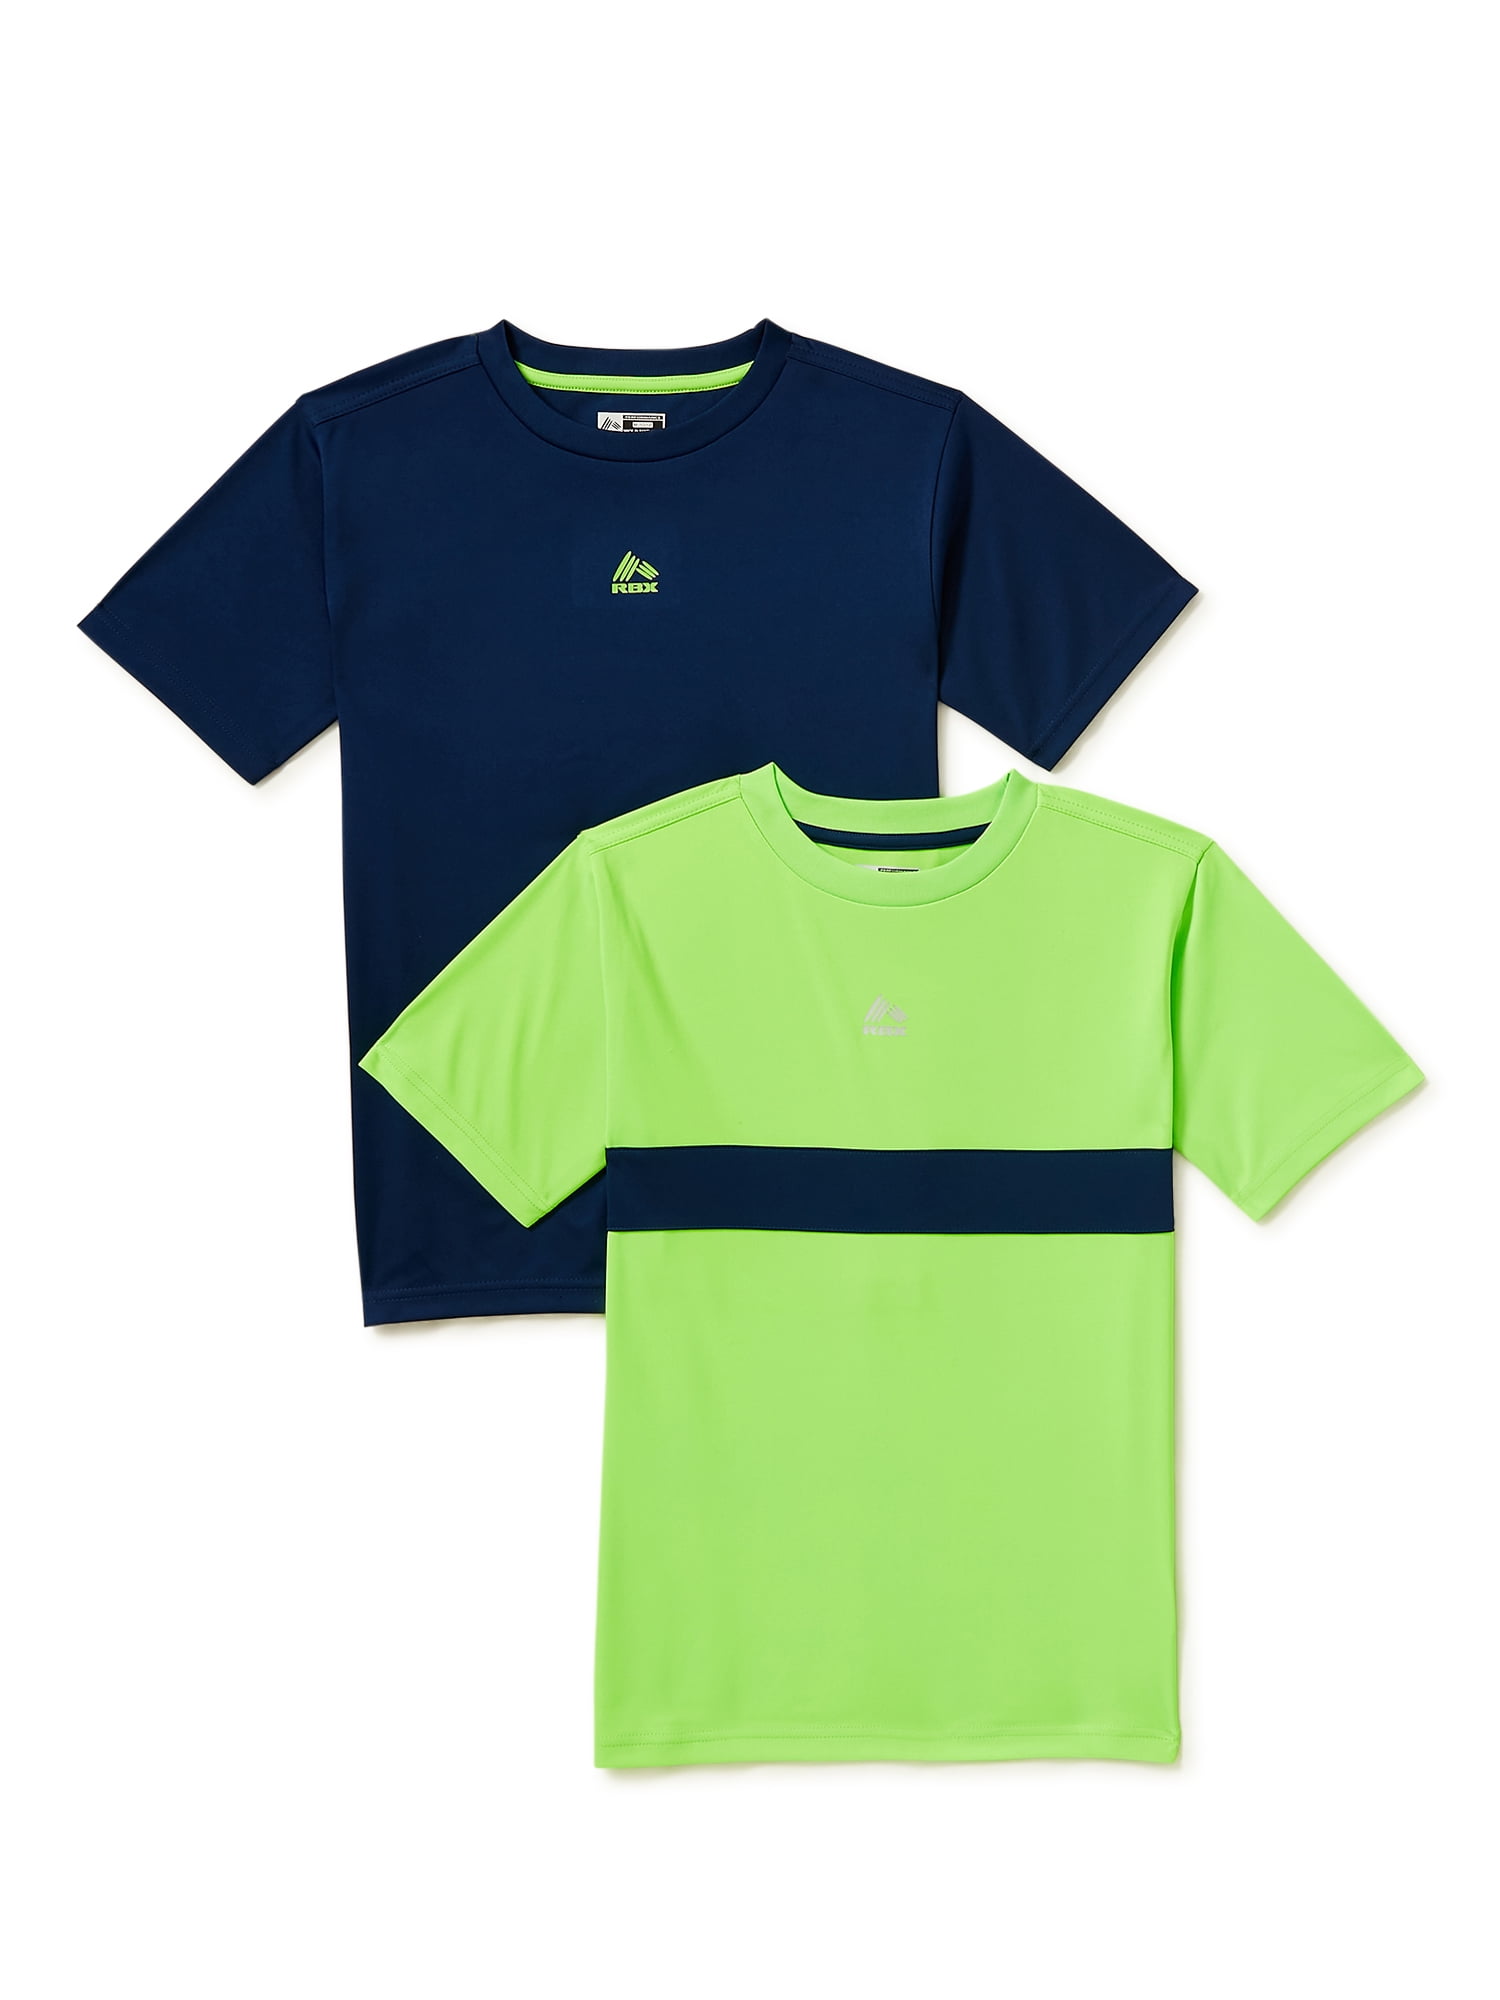 RBX Boys' Neon Performance T-Shirts, 2-Pack, Sizes 8-20